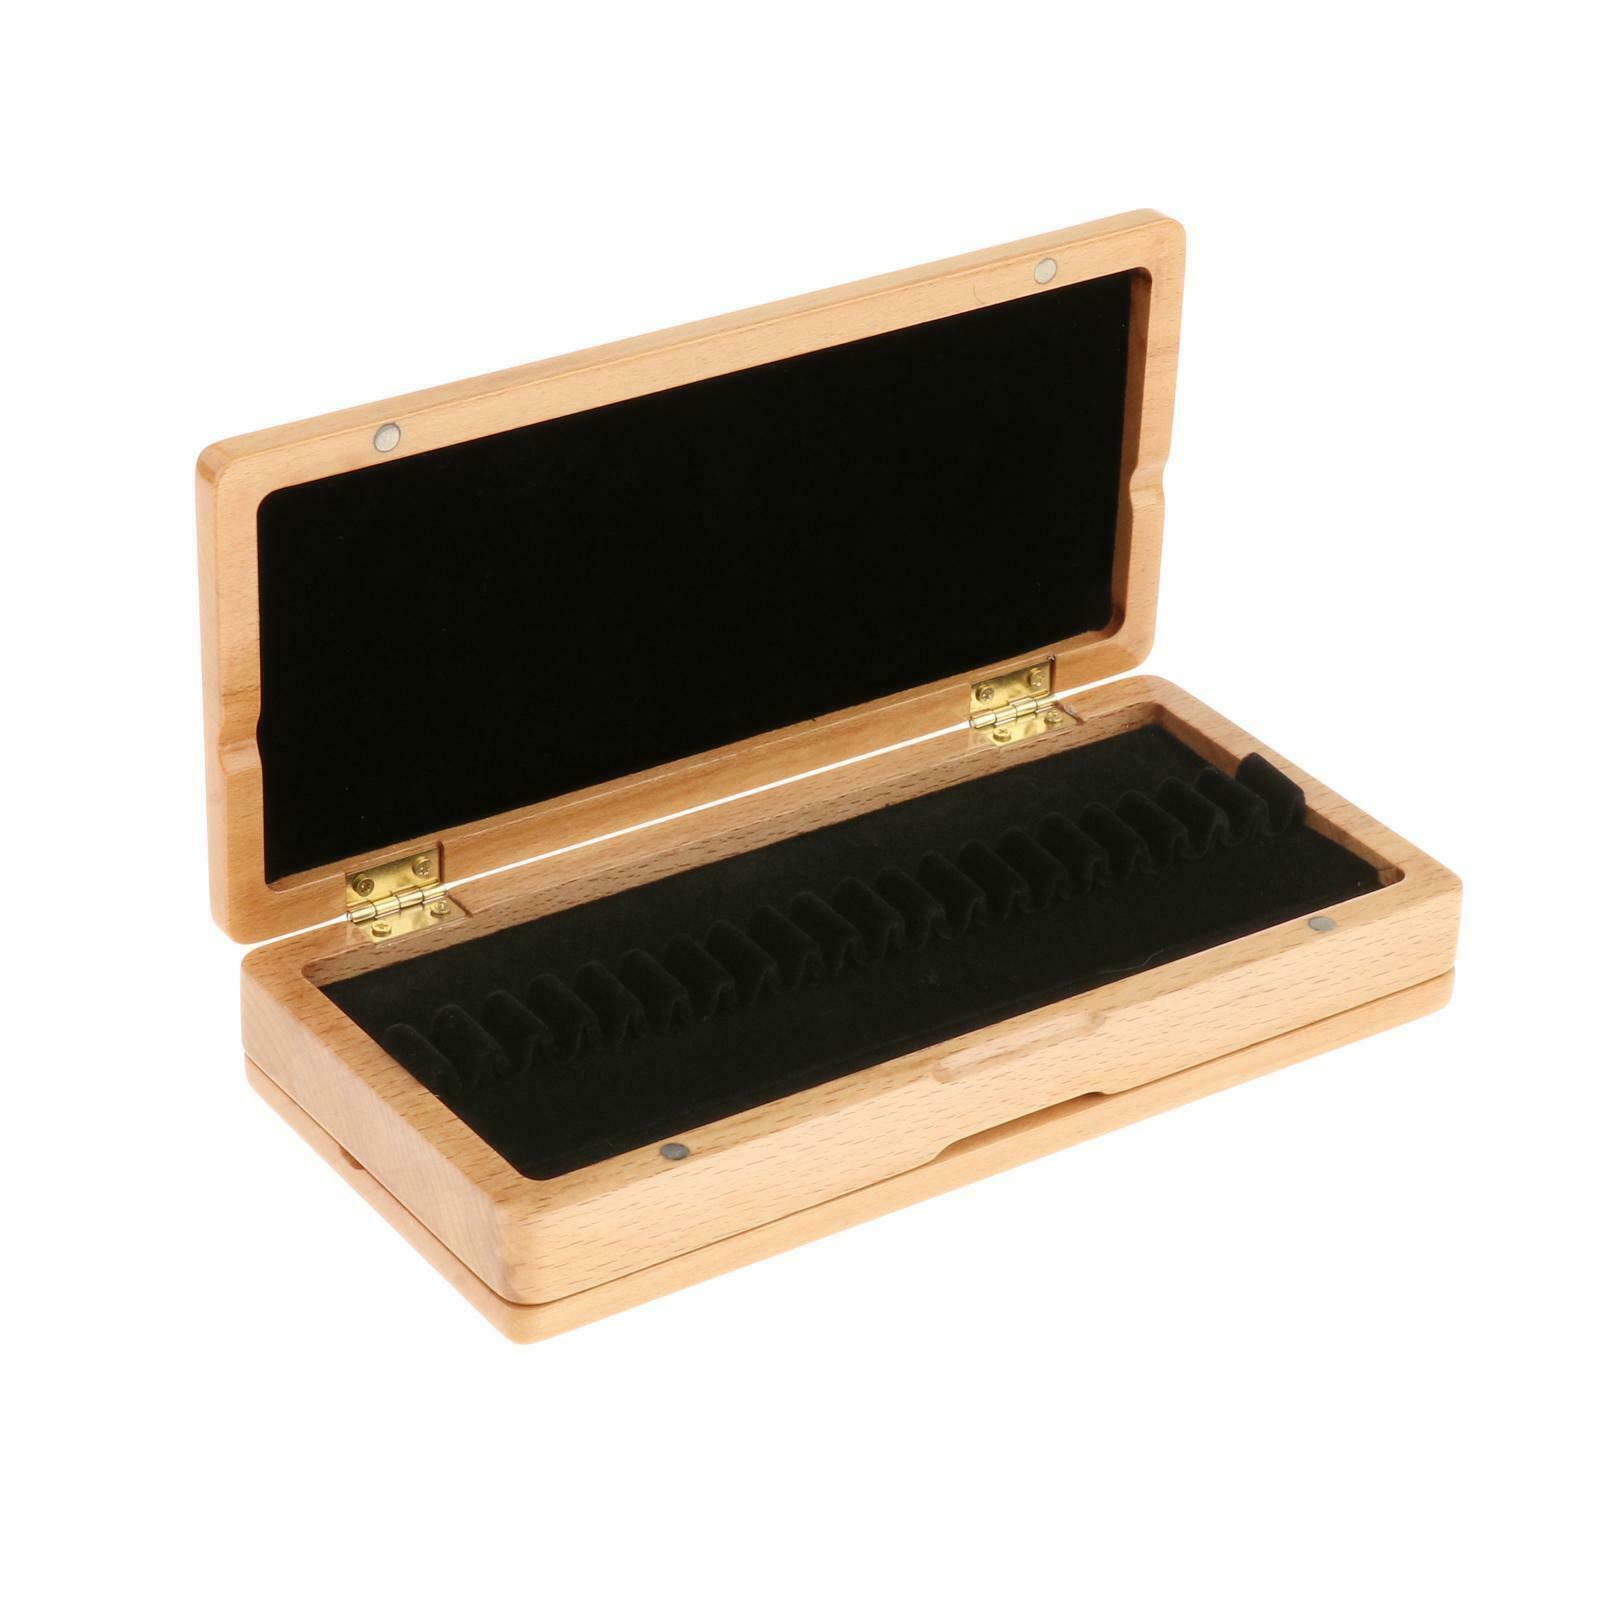 Portable Solid Wood Oboe Reed Case Wooden Holder Box for Oboe 40pcs Reeds